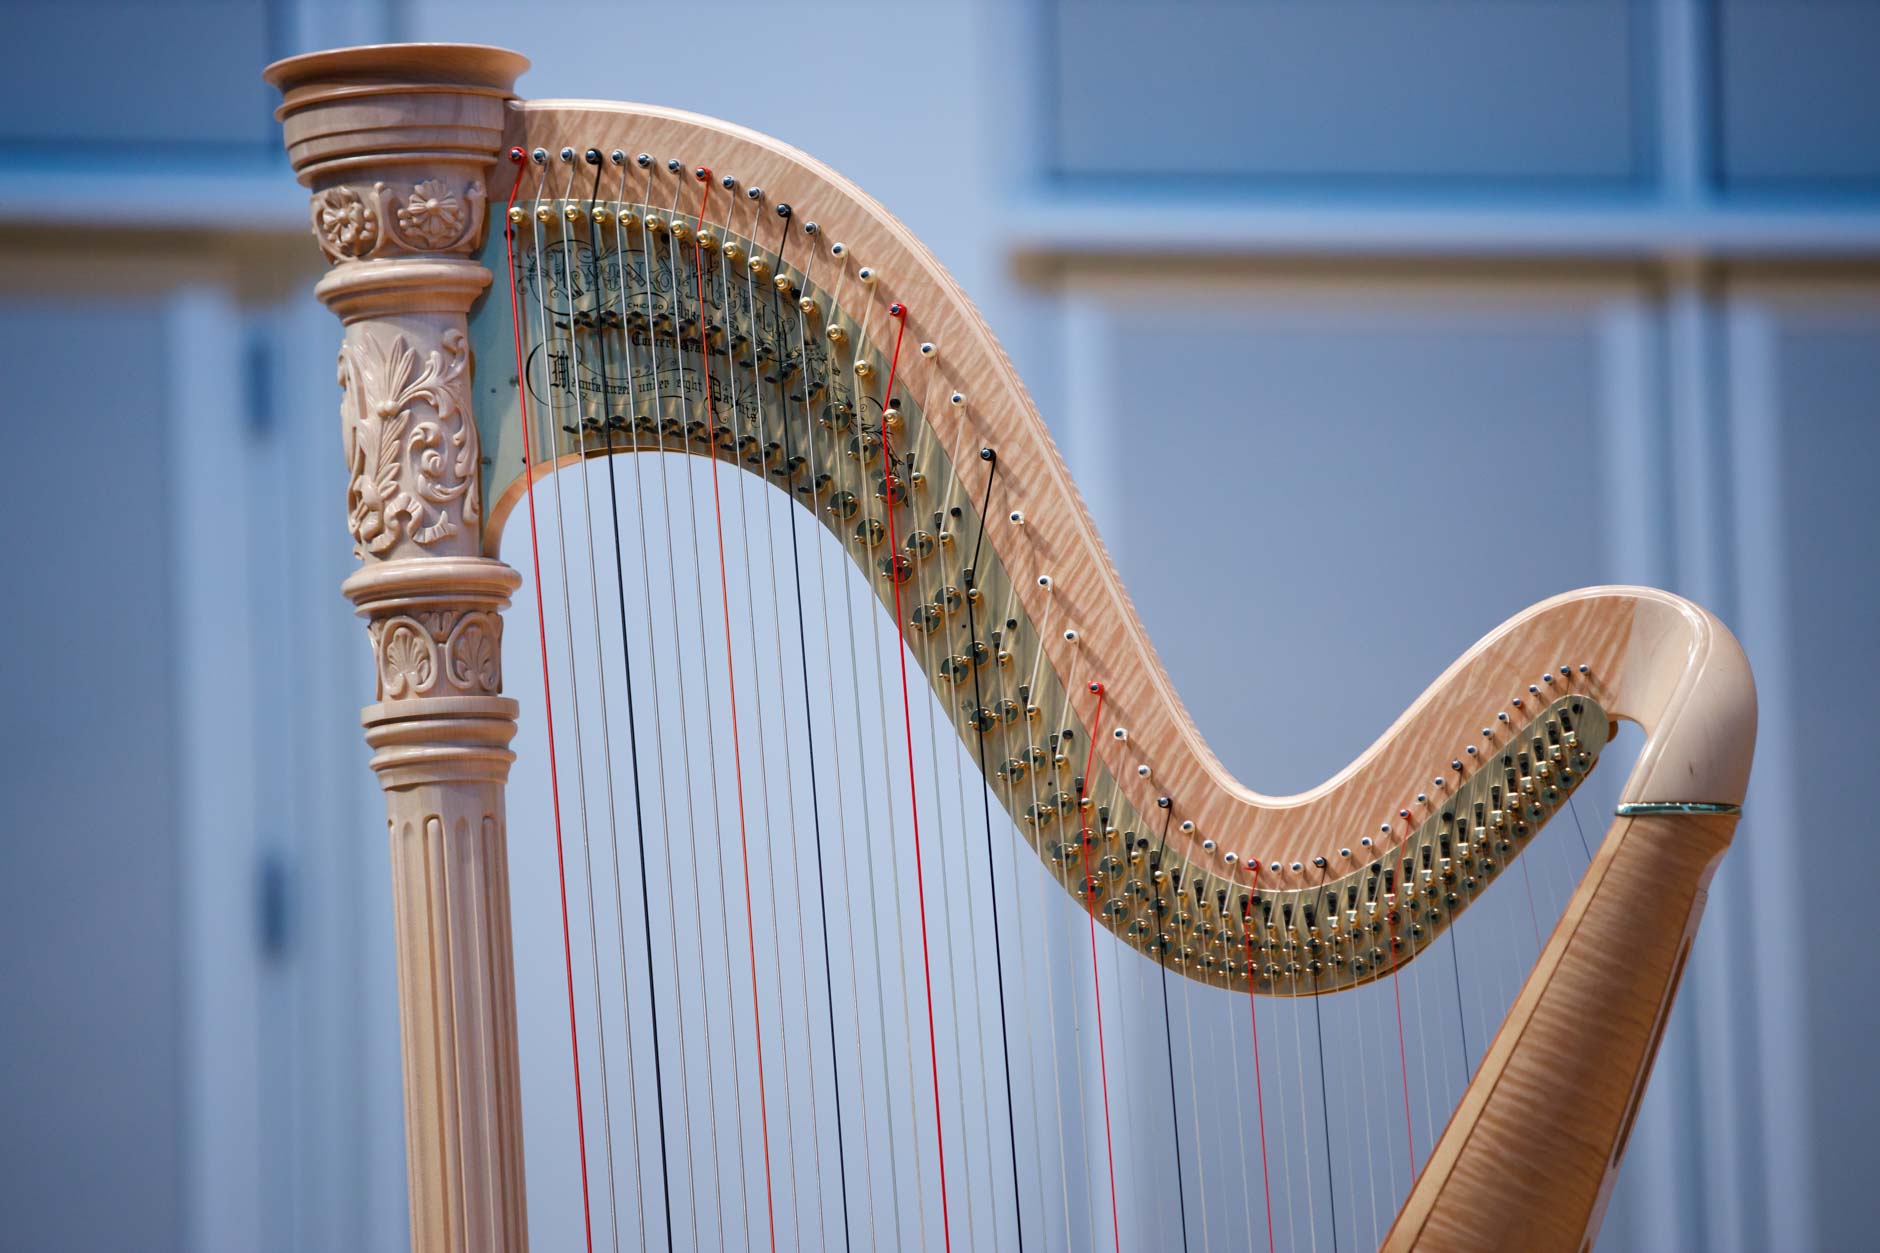 A harp sits on stage before a performance during Stage III at the 11th USA International Harp Competition at Indiana University in Bloomington, Indiana on Wednesday, July 10, 2019. (Photo by James Brosher)